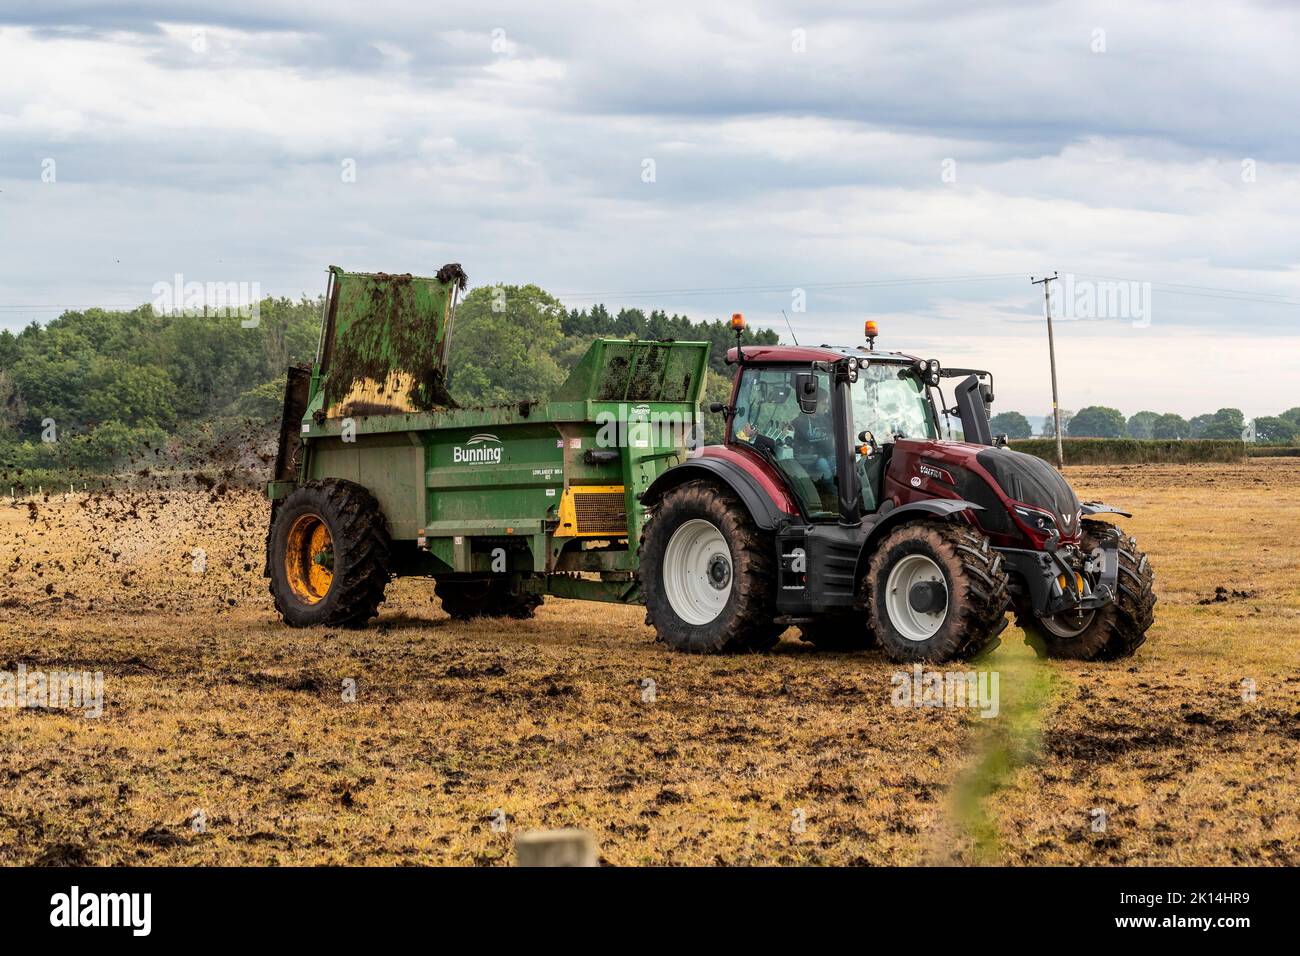 Modern agriculture. Muck spreading prior to ploughing. Stock Photo